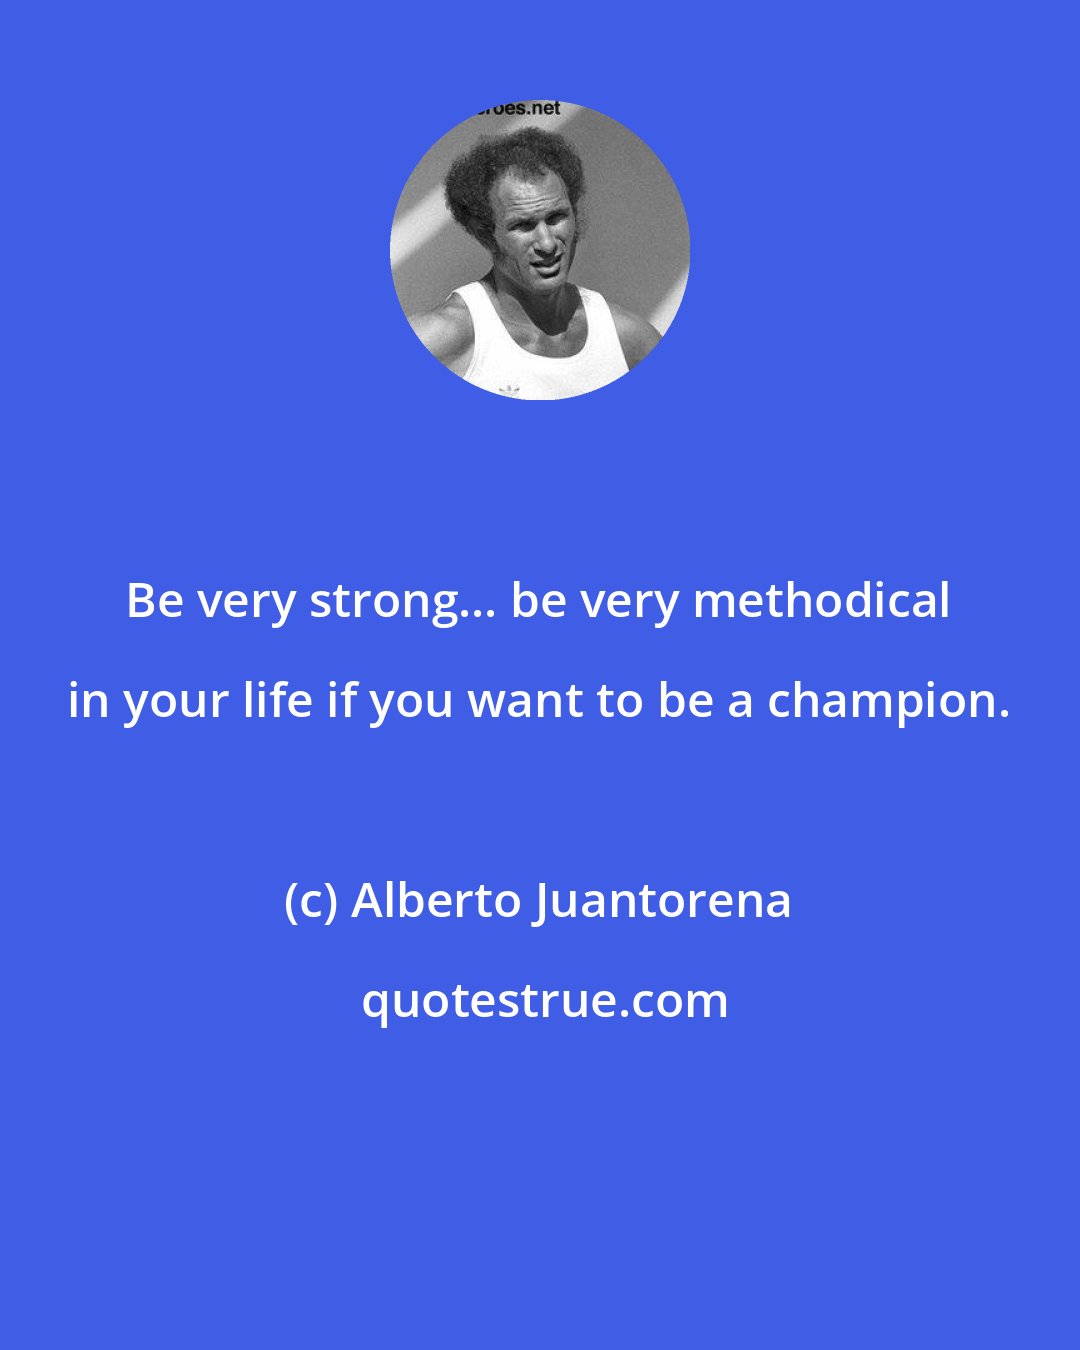 Alberto Juantorena: Be very strong... be very methodical in your life if you want to be a champion.